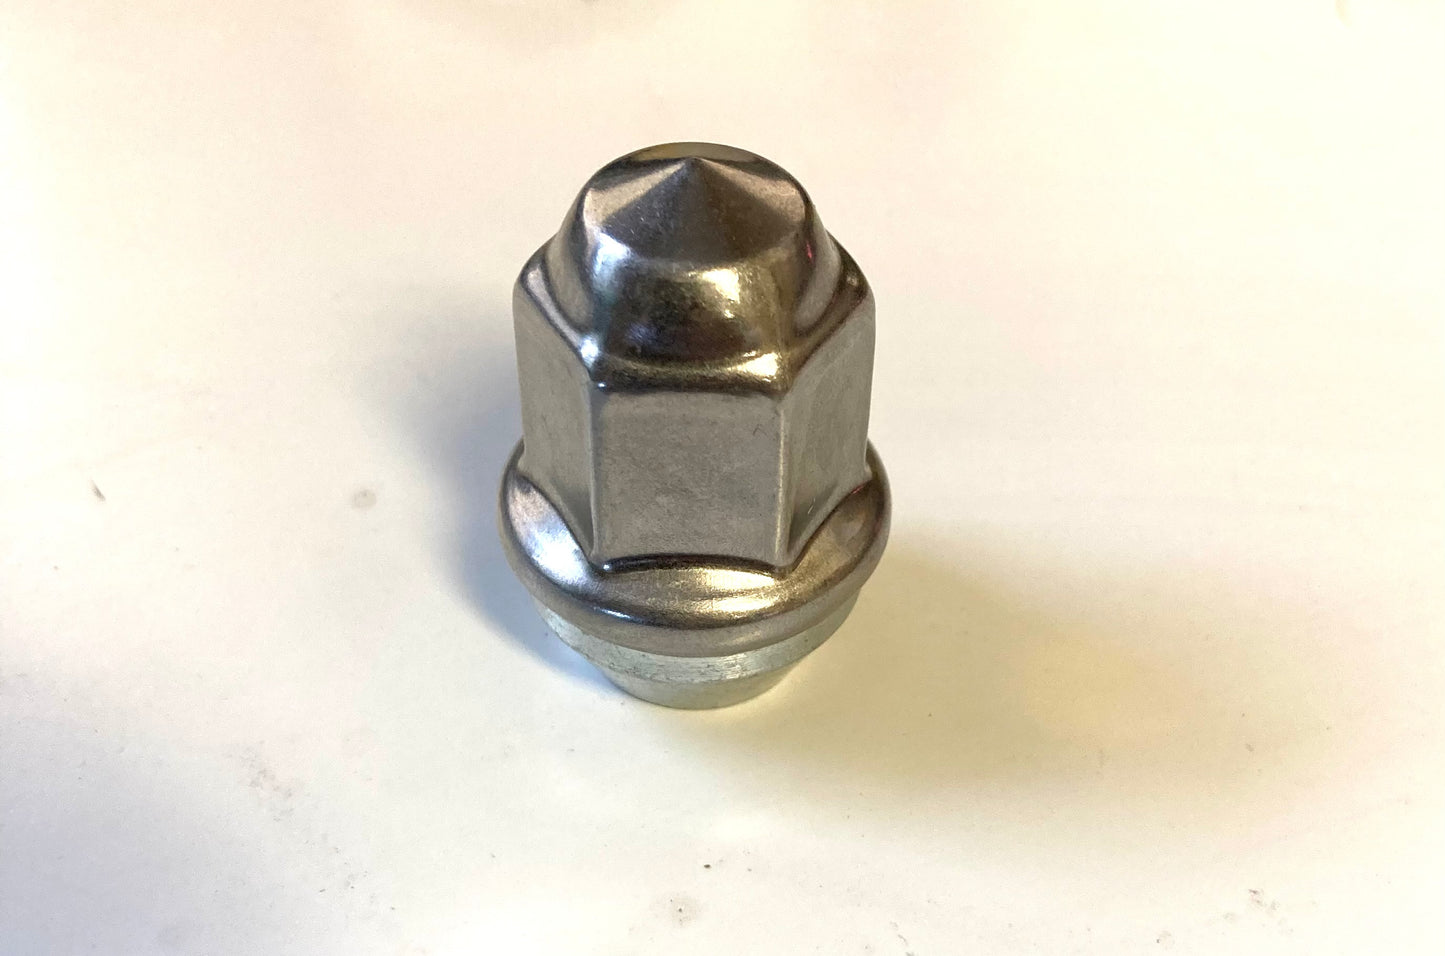 Lug nuts: Various sizes and styles